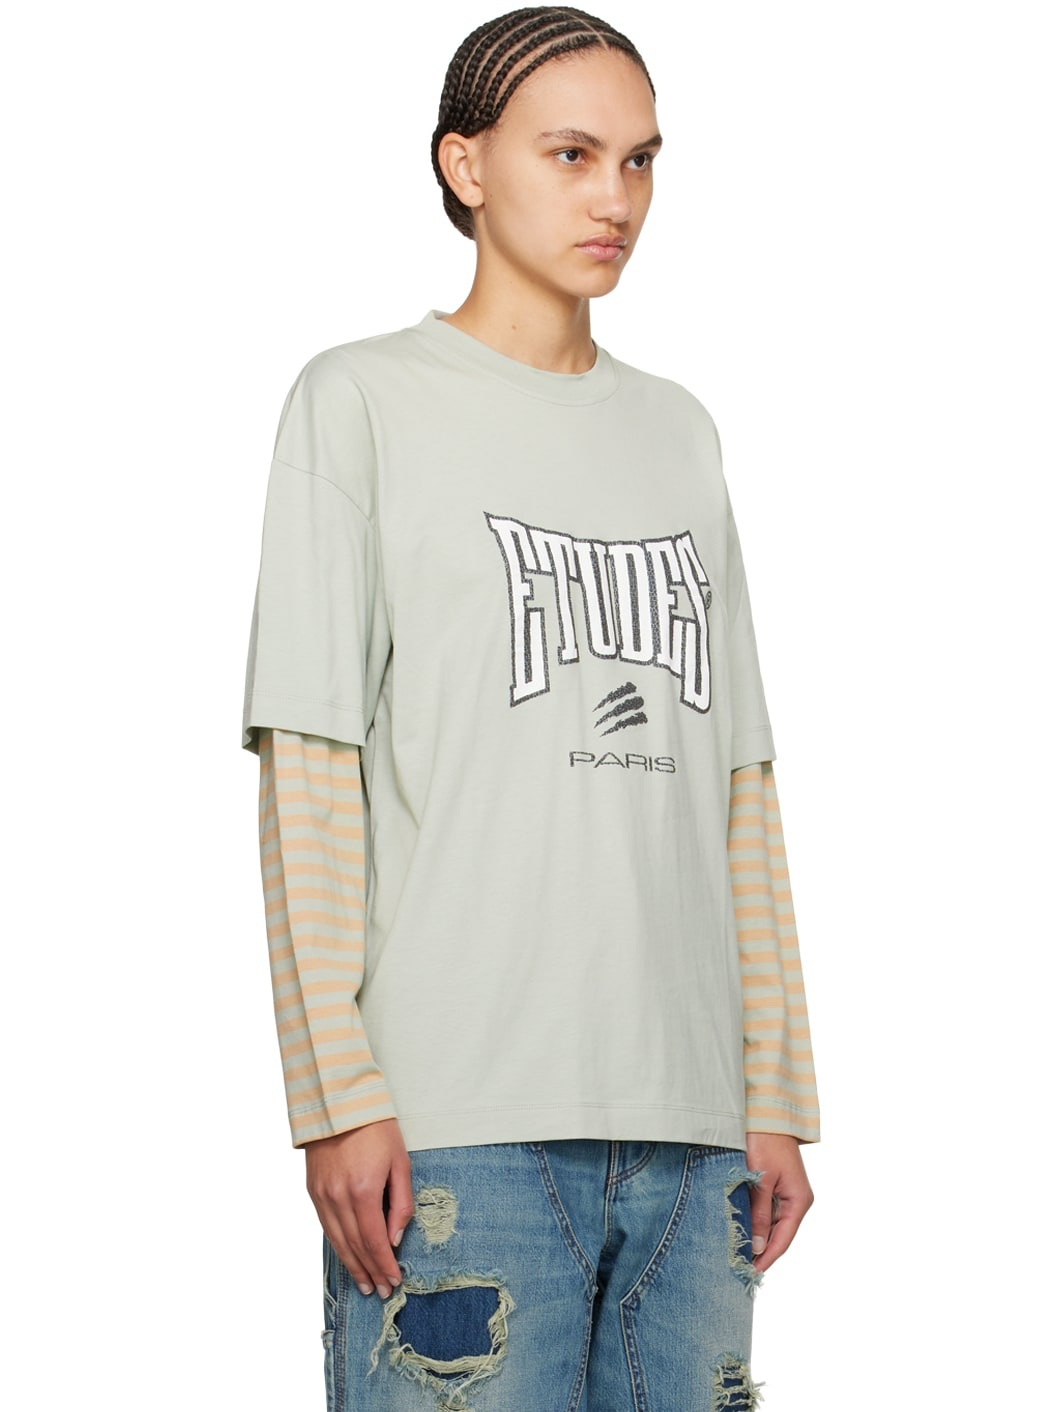 Gray Goudron Boxing Long Sleeve T-Shirt - 2